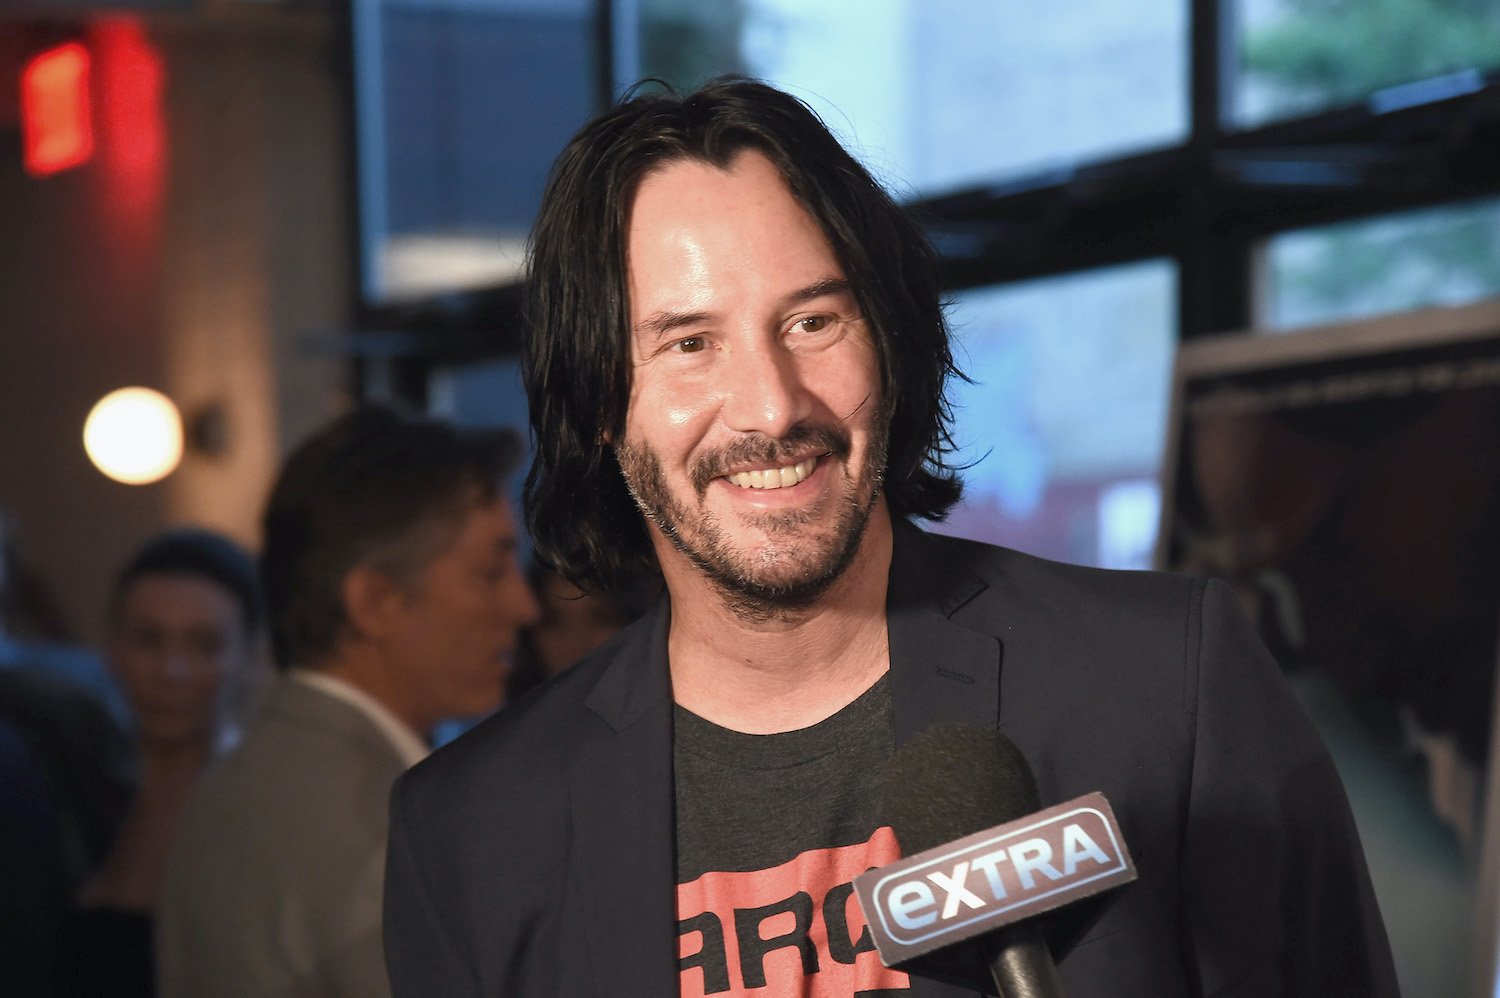 Keanu Reeves attends the 'Siberia' New York premiere on July 11, 2018